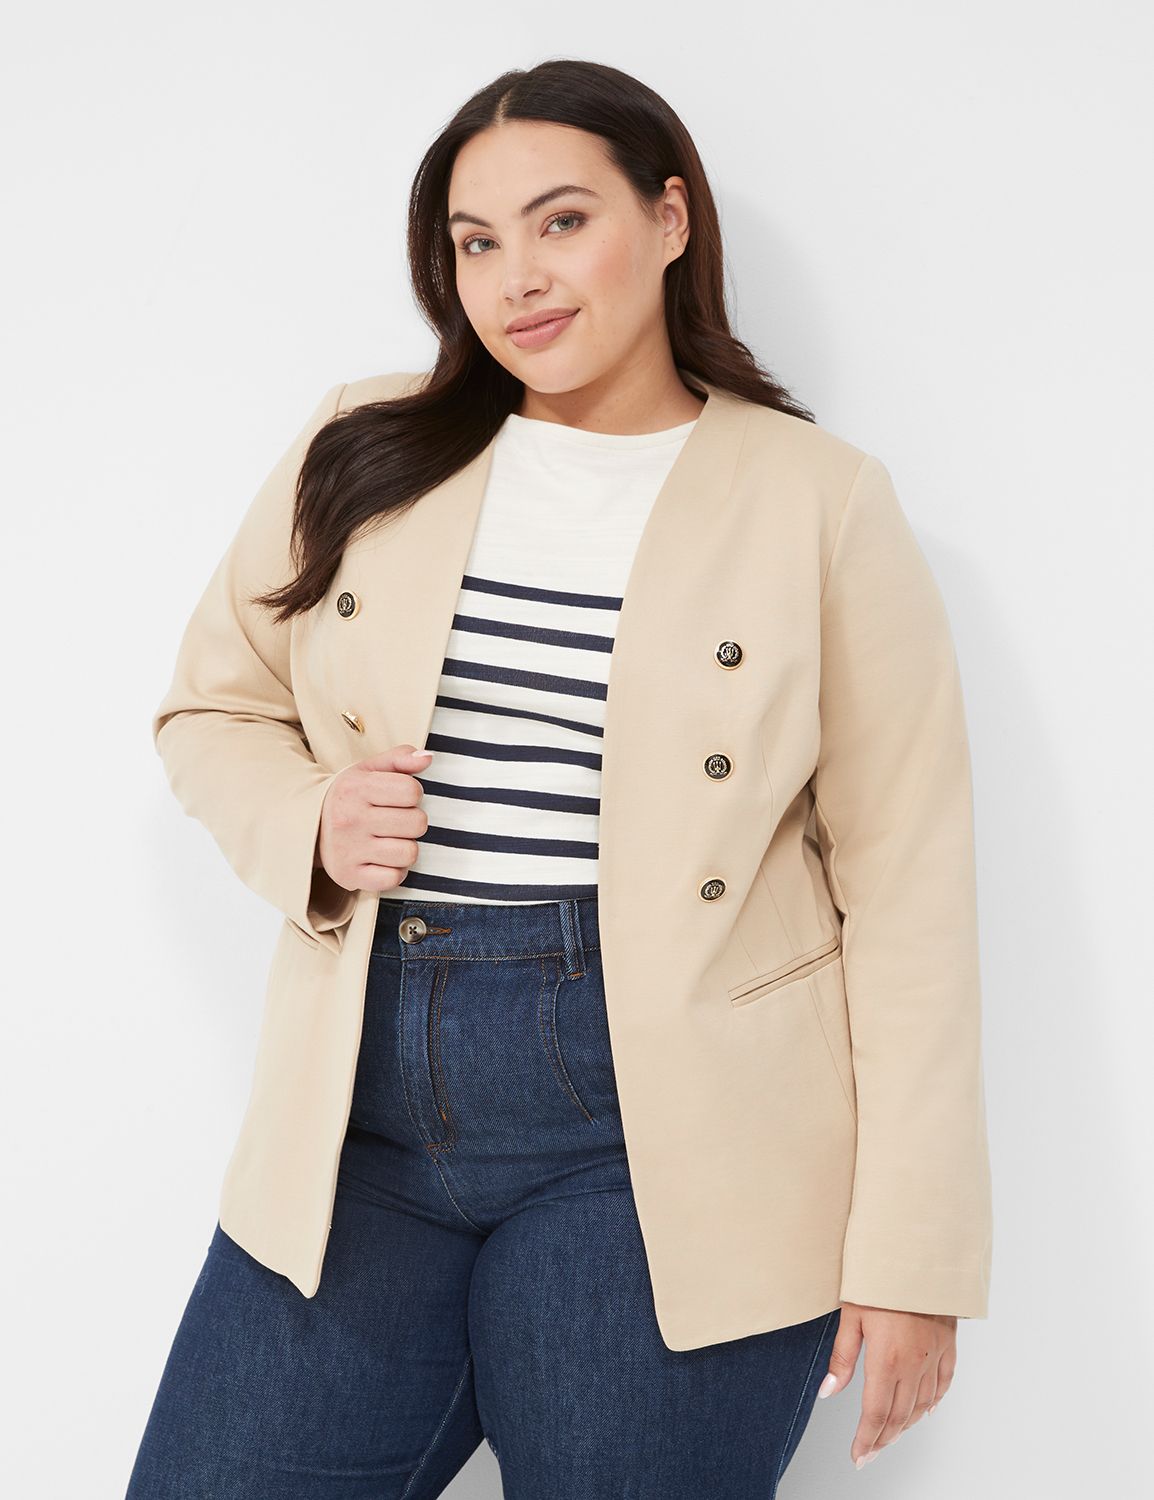 13 plus-size professional clothes perfect for the office - Reviewed